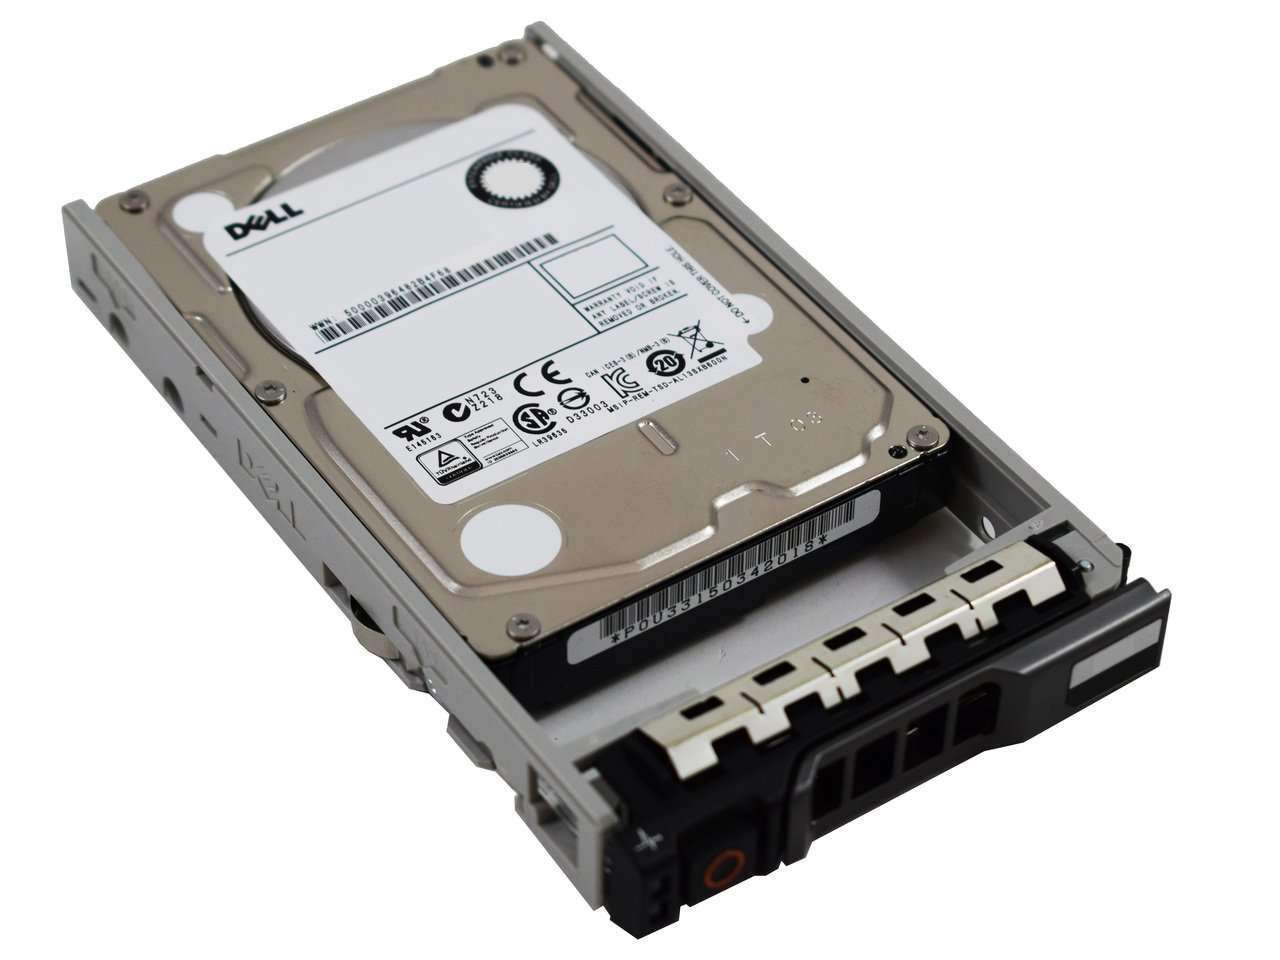 Dell G13 Y06G3 600GB 15K RPM SAS 12Gb/s 512n 2.5" Manufacturer Recertified HDD